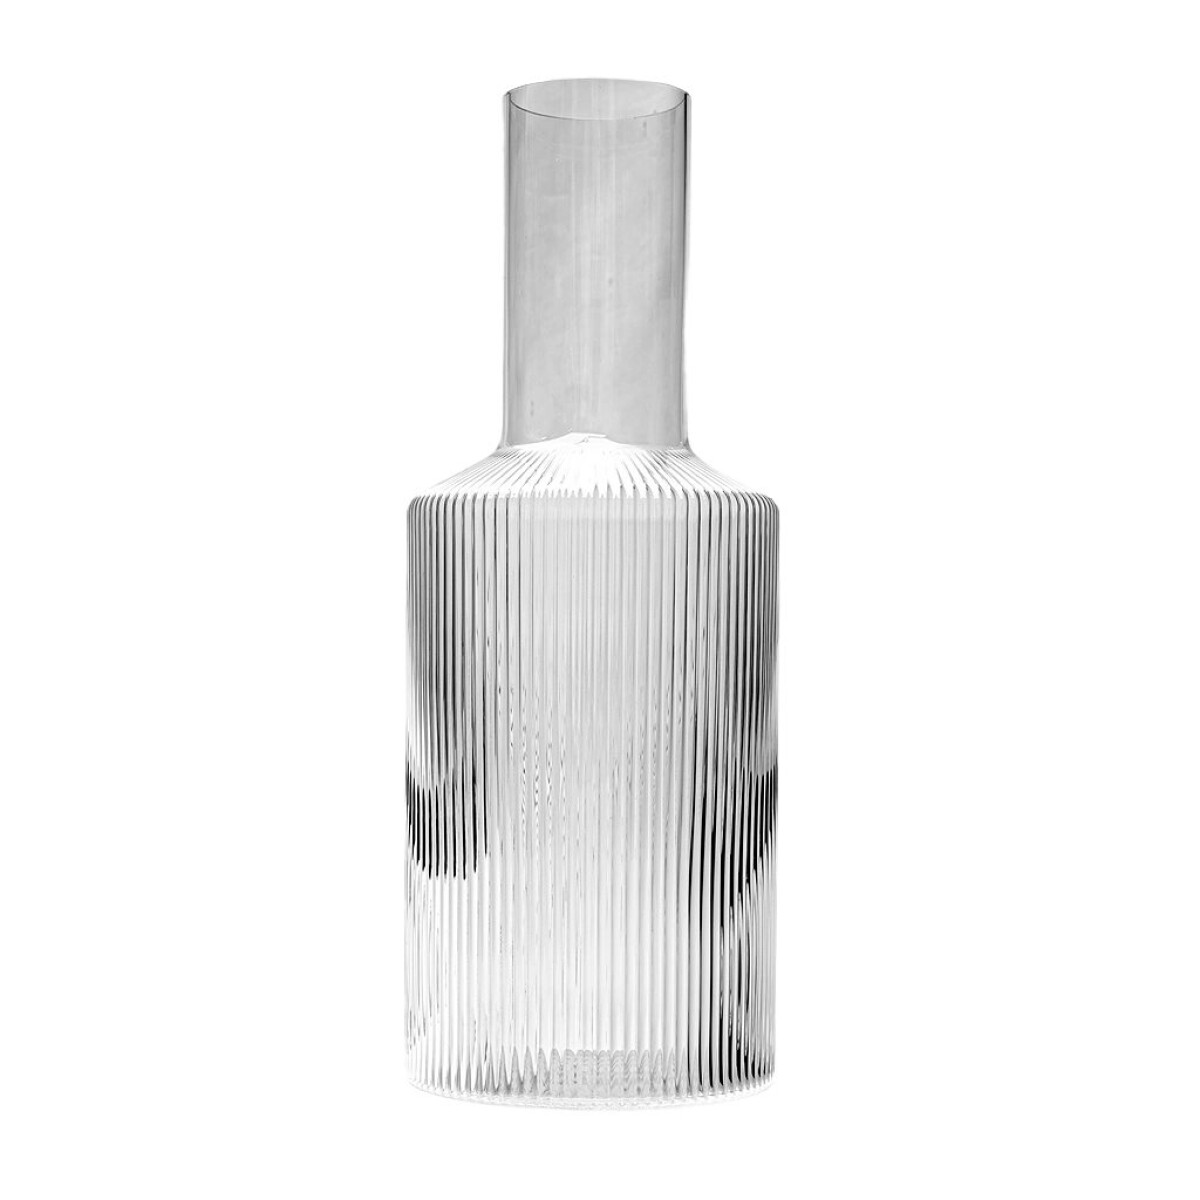 DECANTER 1.0L RAYAS RELIEVE OPTIC 